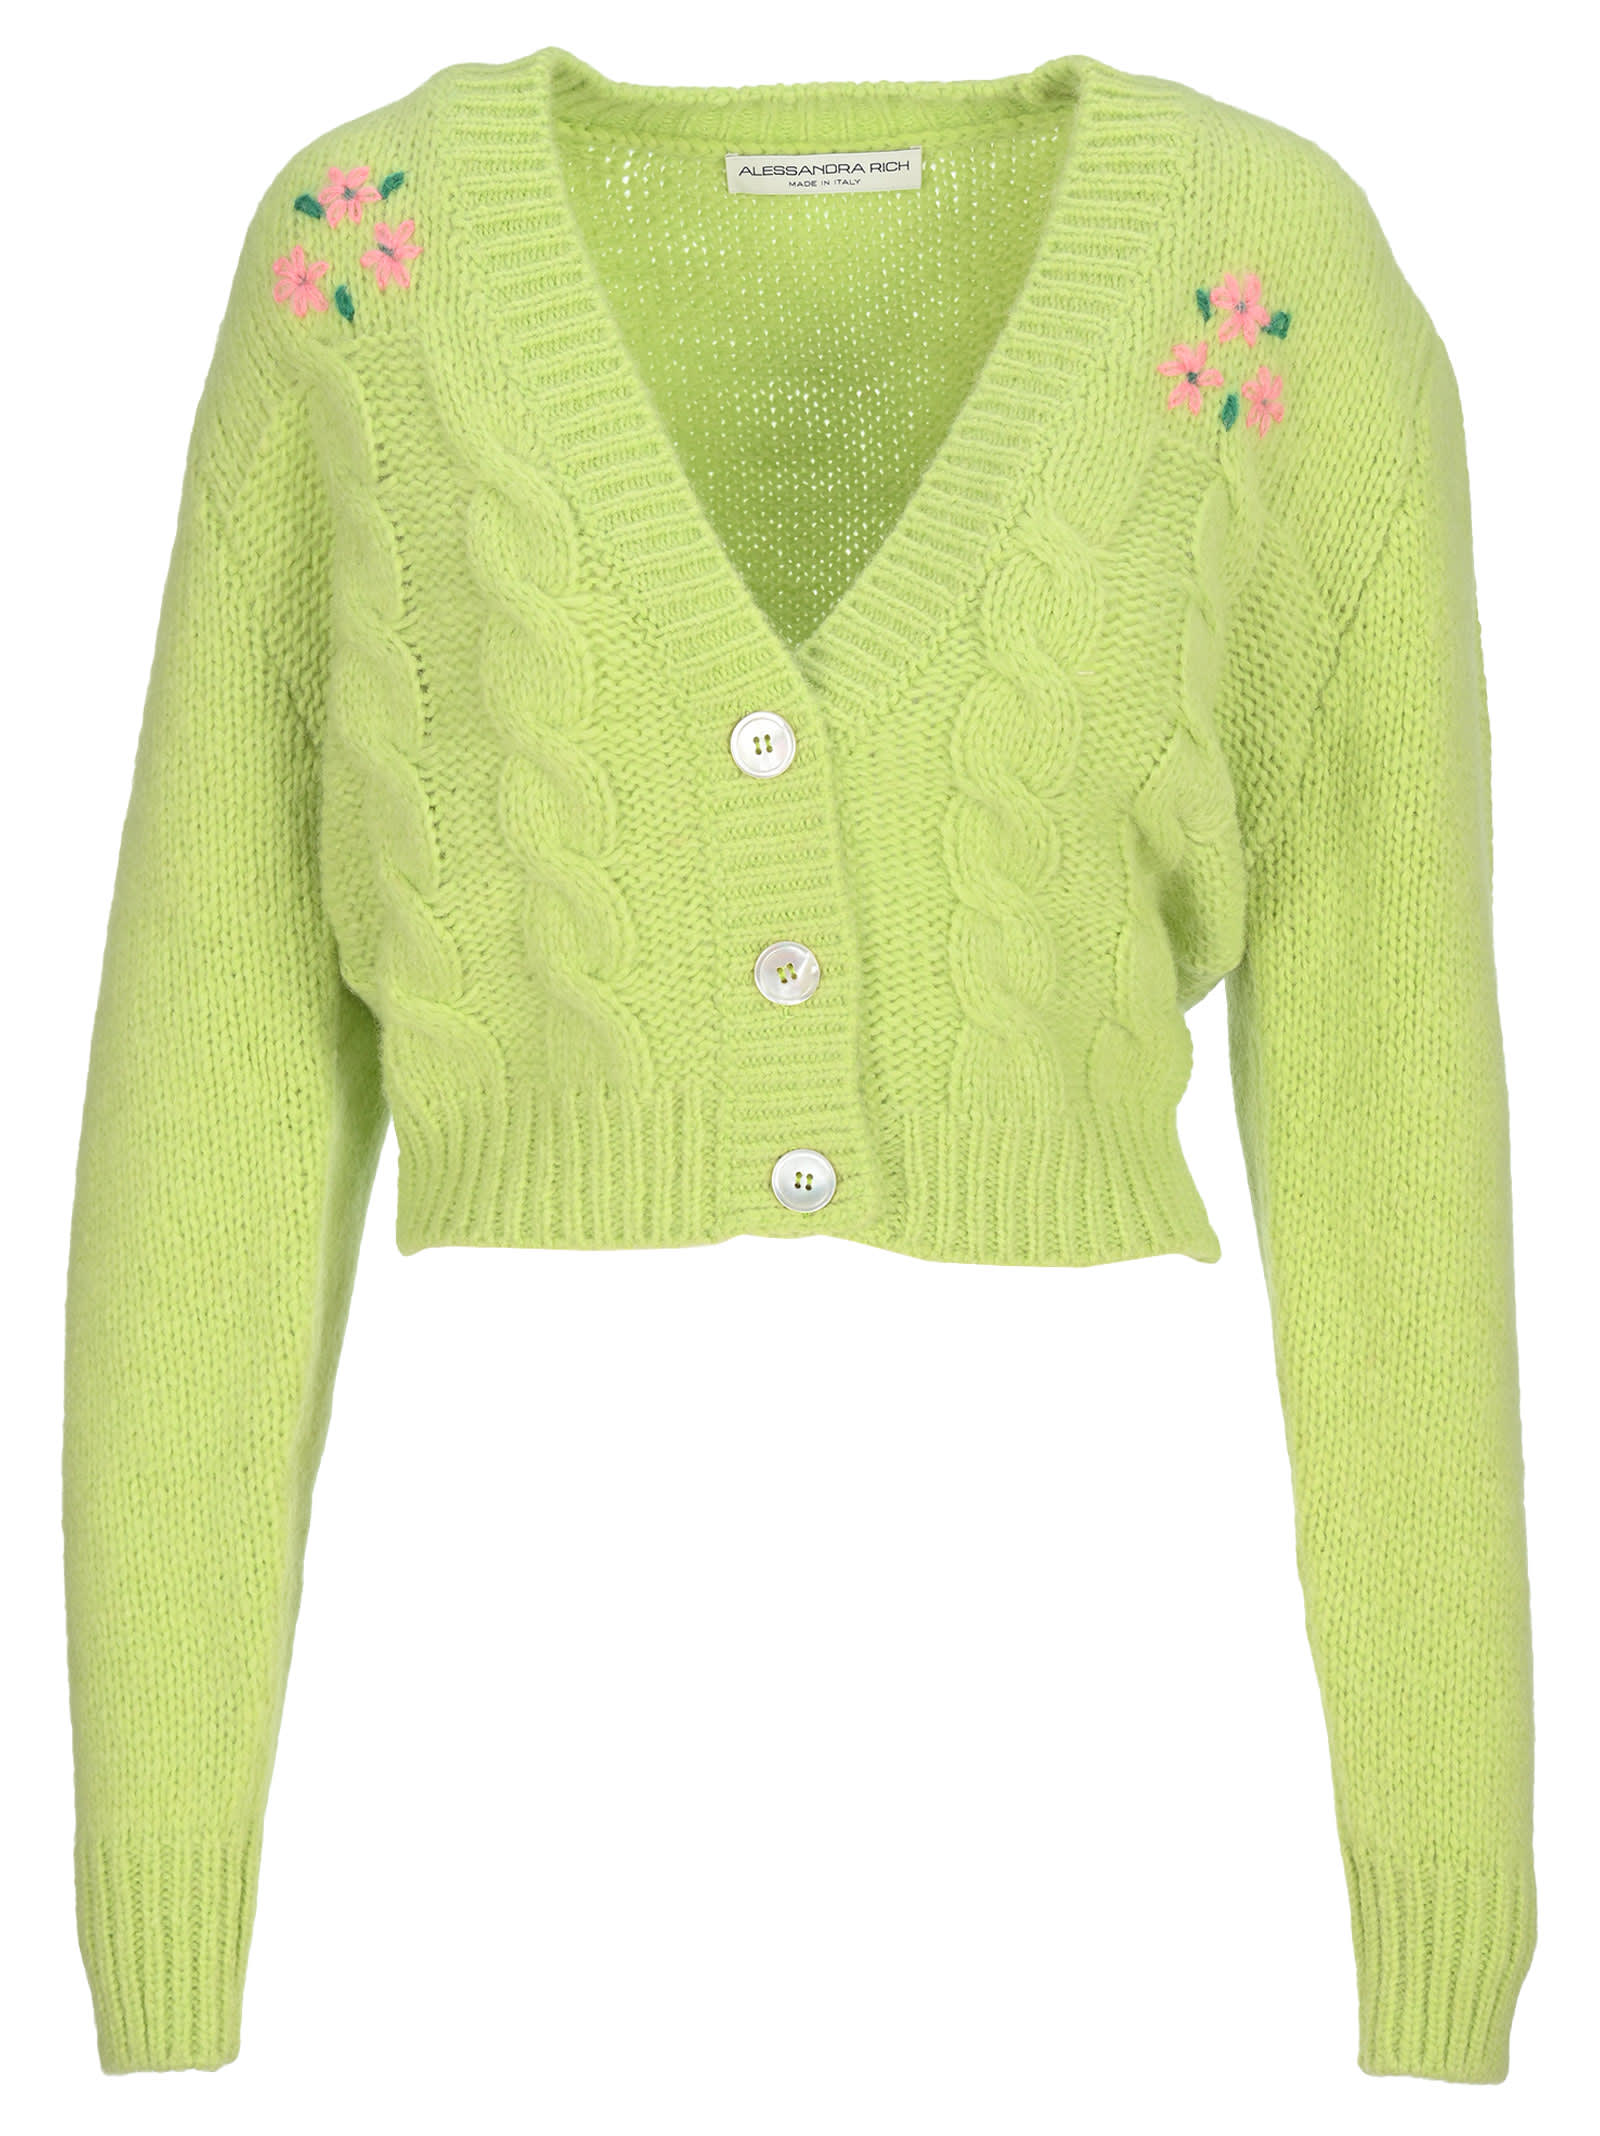 Alessandra Rich Embellished Mohair Cropped Cardigan